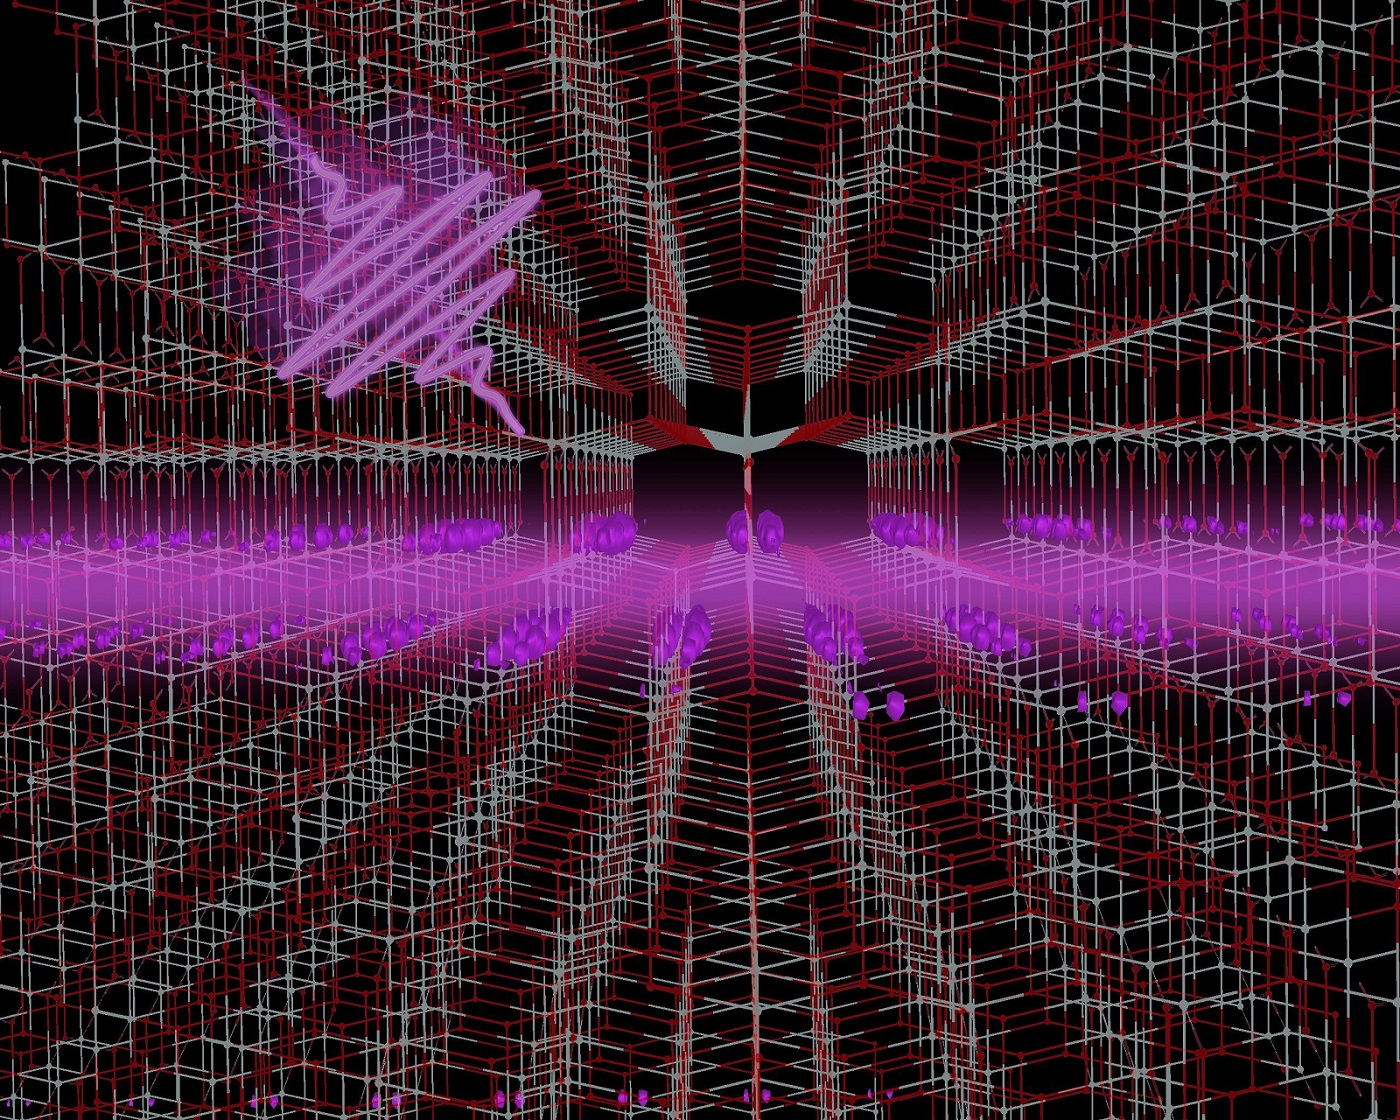 Lattice structure of anatase TiO2 with a graphical representation of the 2D exciton that is generated by the absorption of light